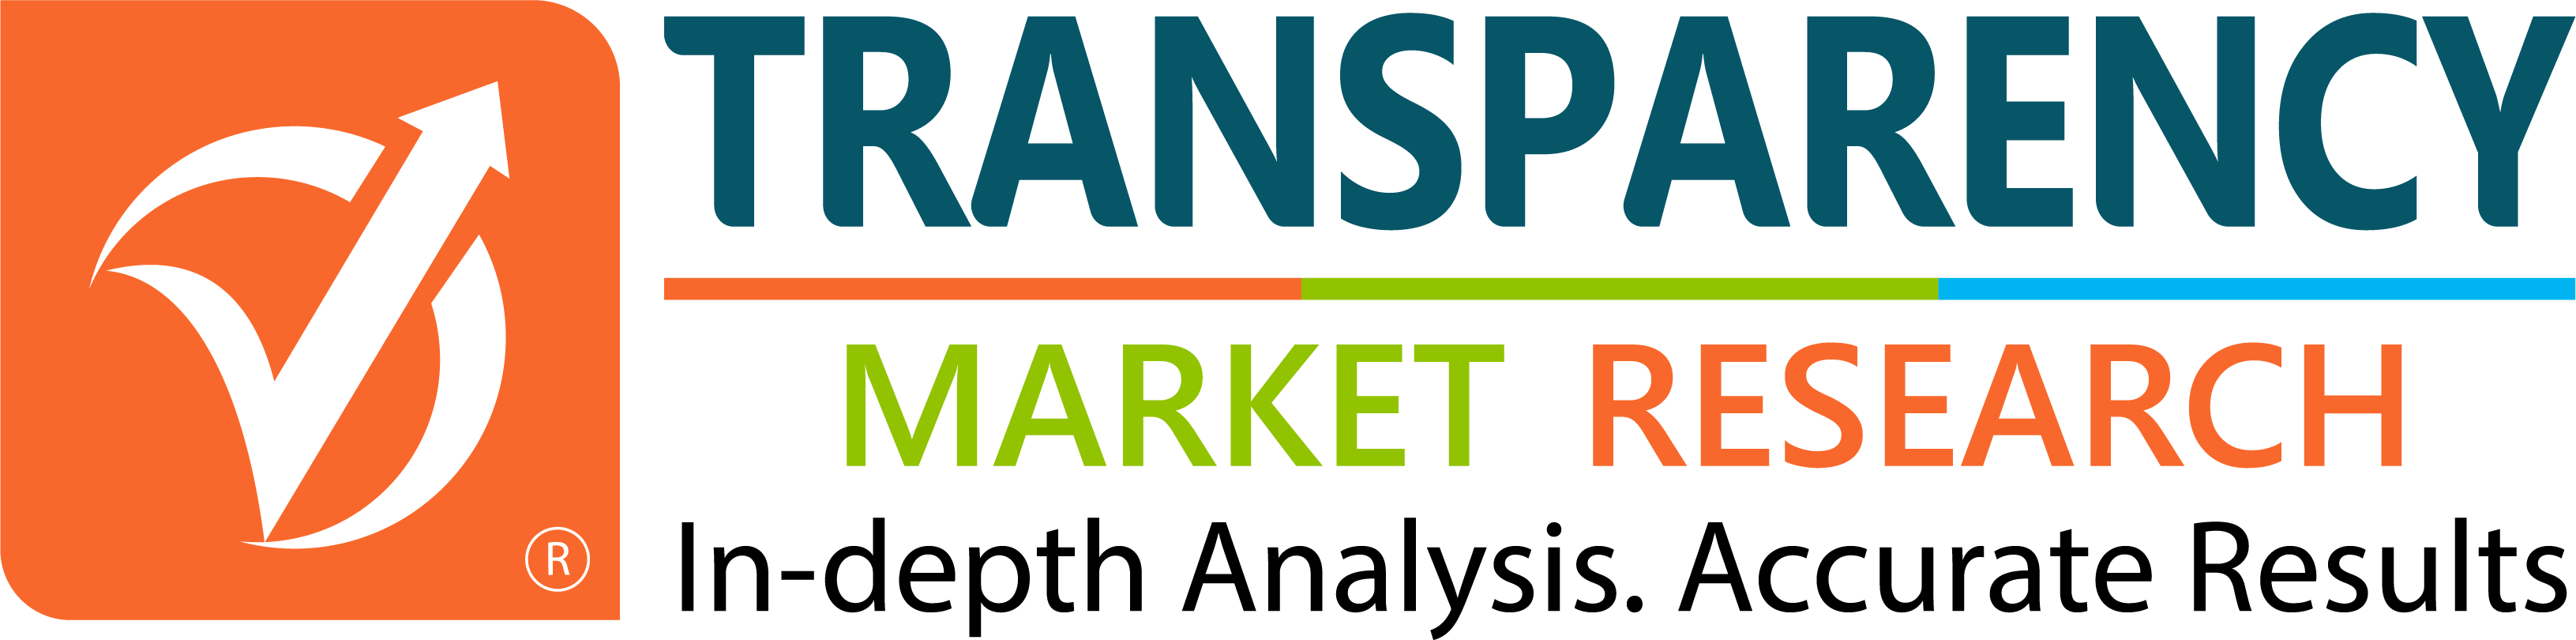 Blood Cell Analyzer Market: Increasing Demand for Blood Transfusion Boosts Growth